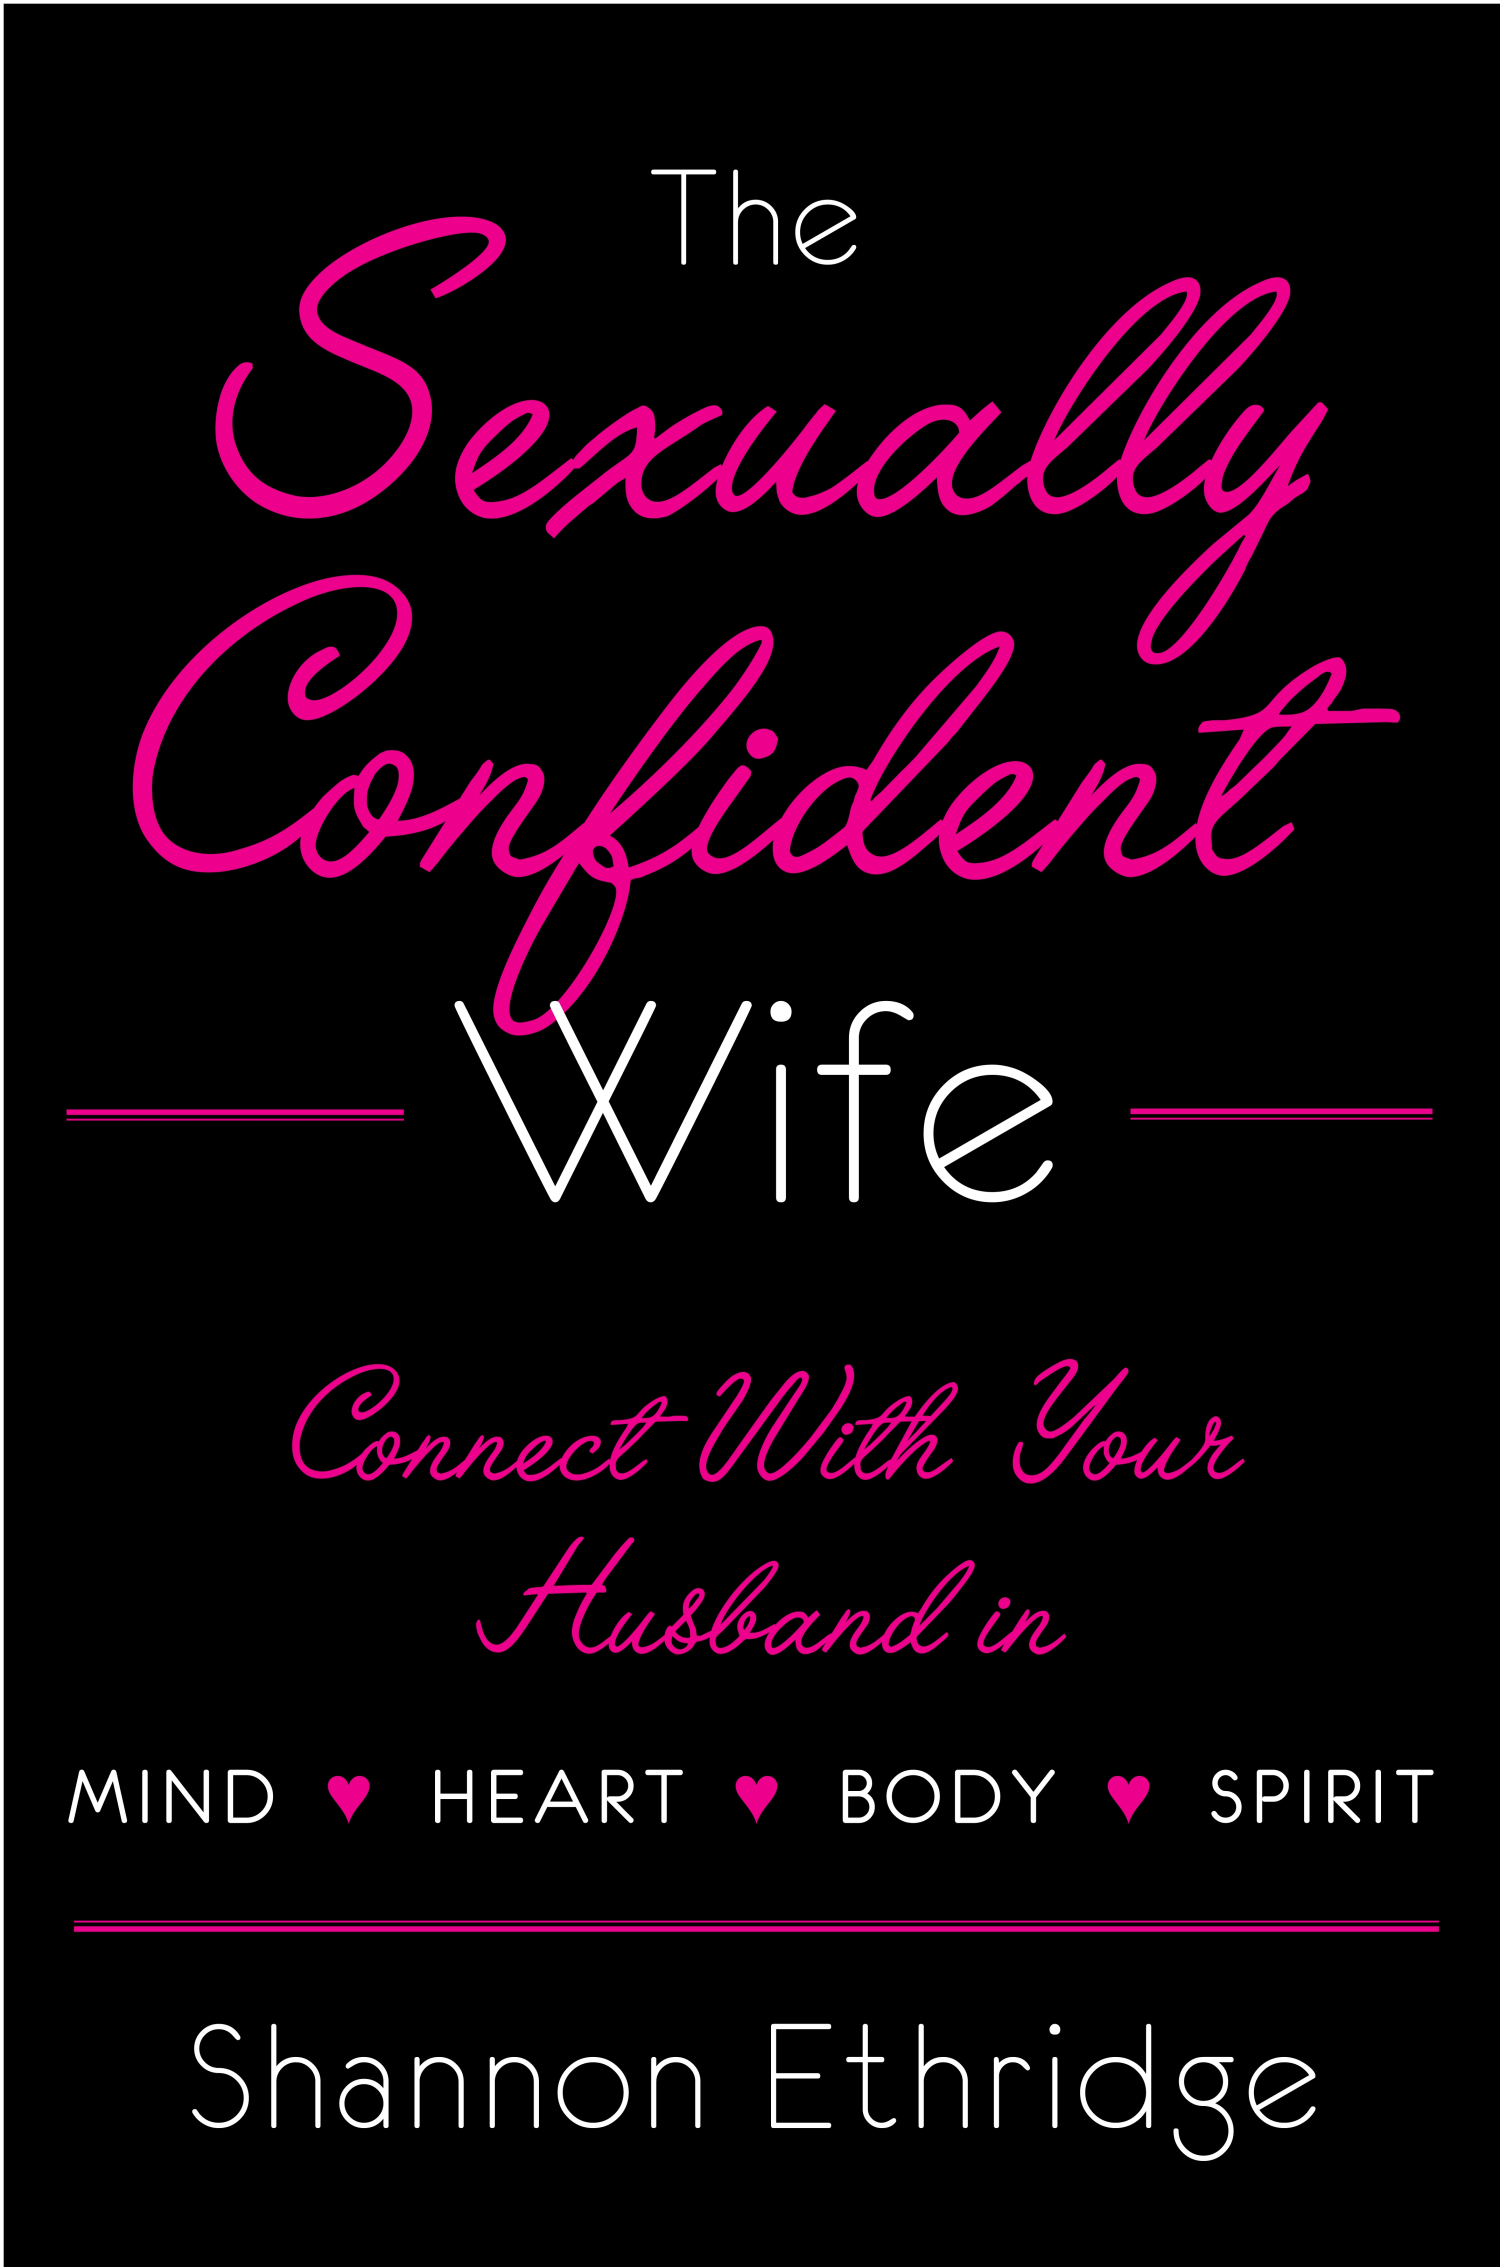 How to restore your sexual confidence pic